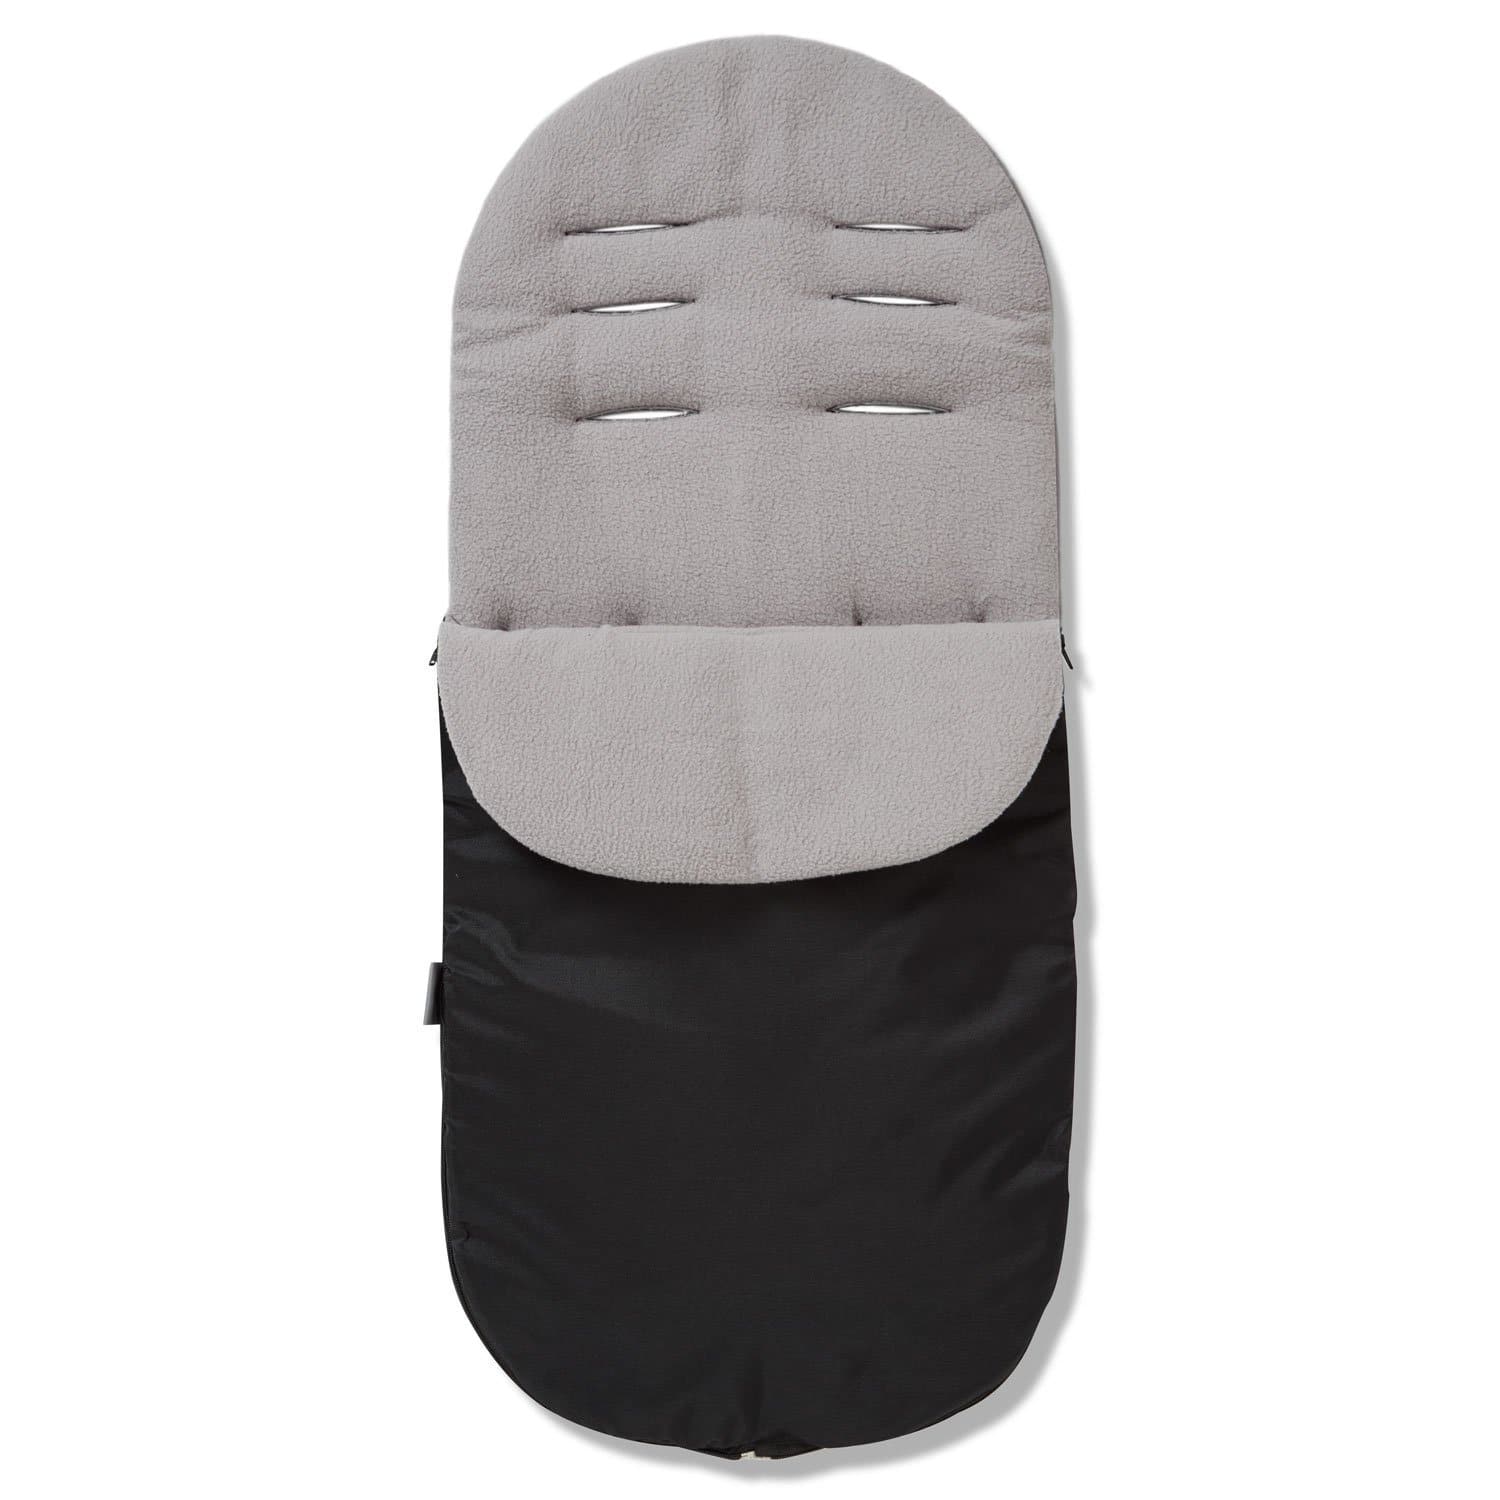 Footmuff / Cosy Toes Compatible with Bebe Confort - For Your Little One